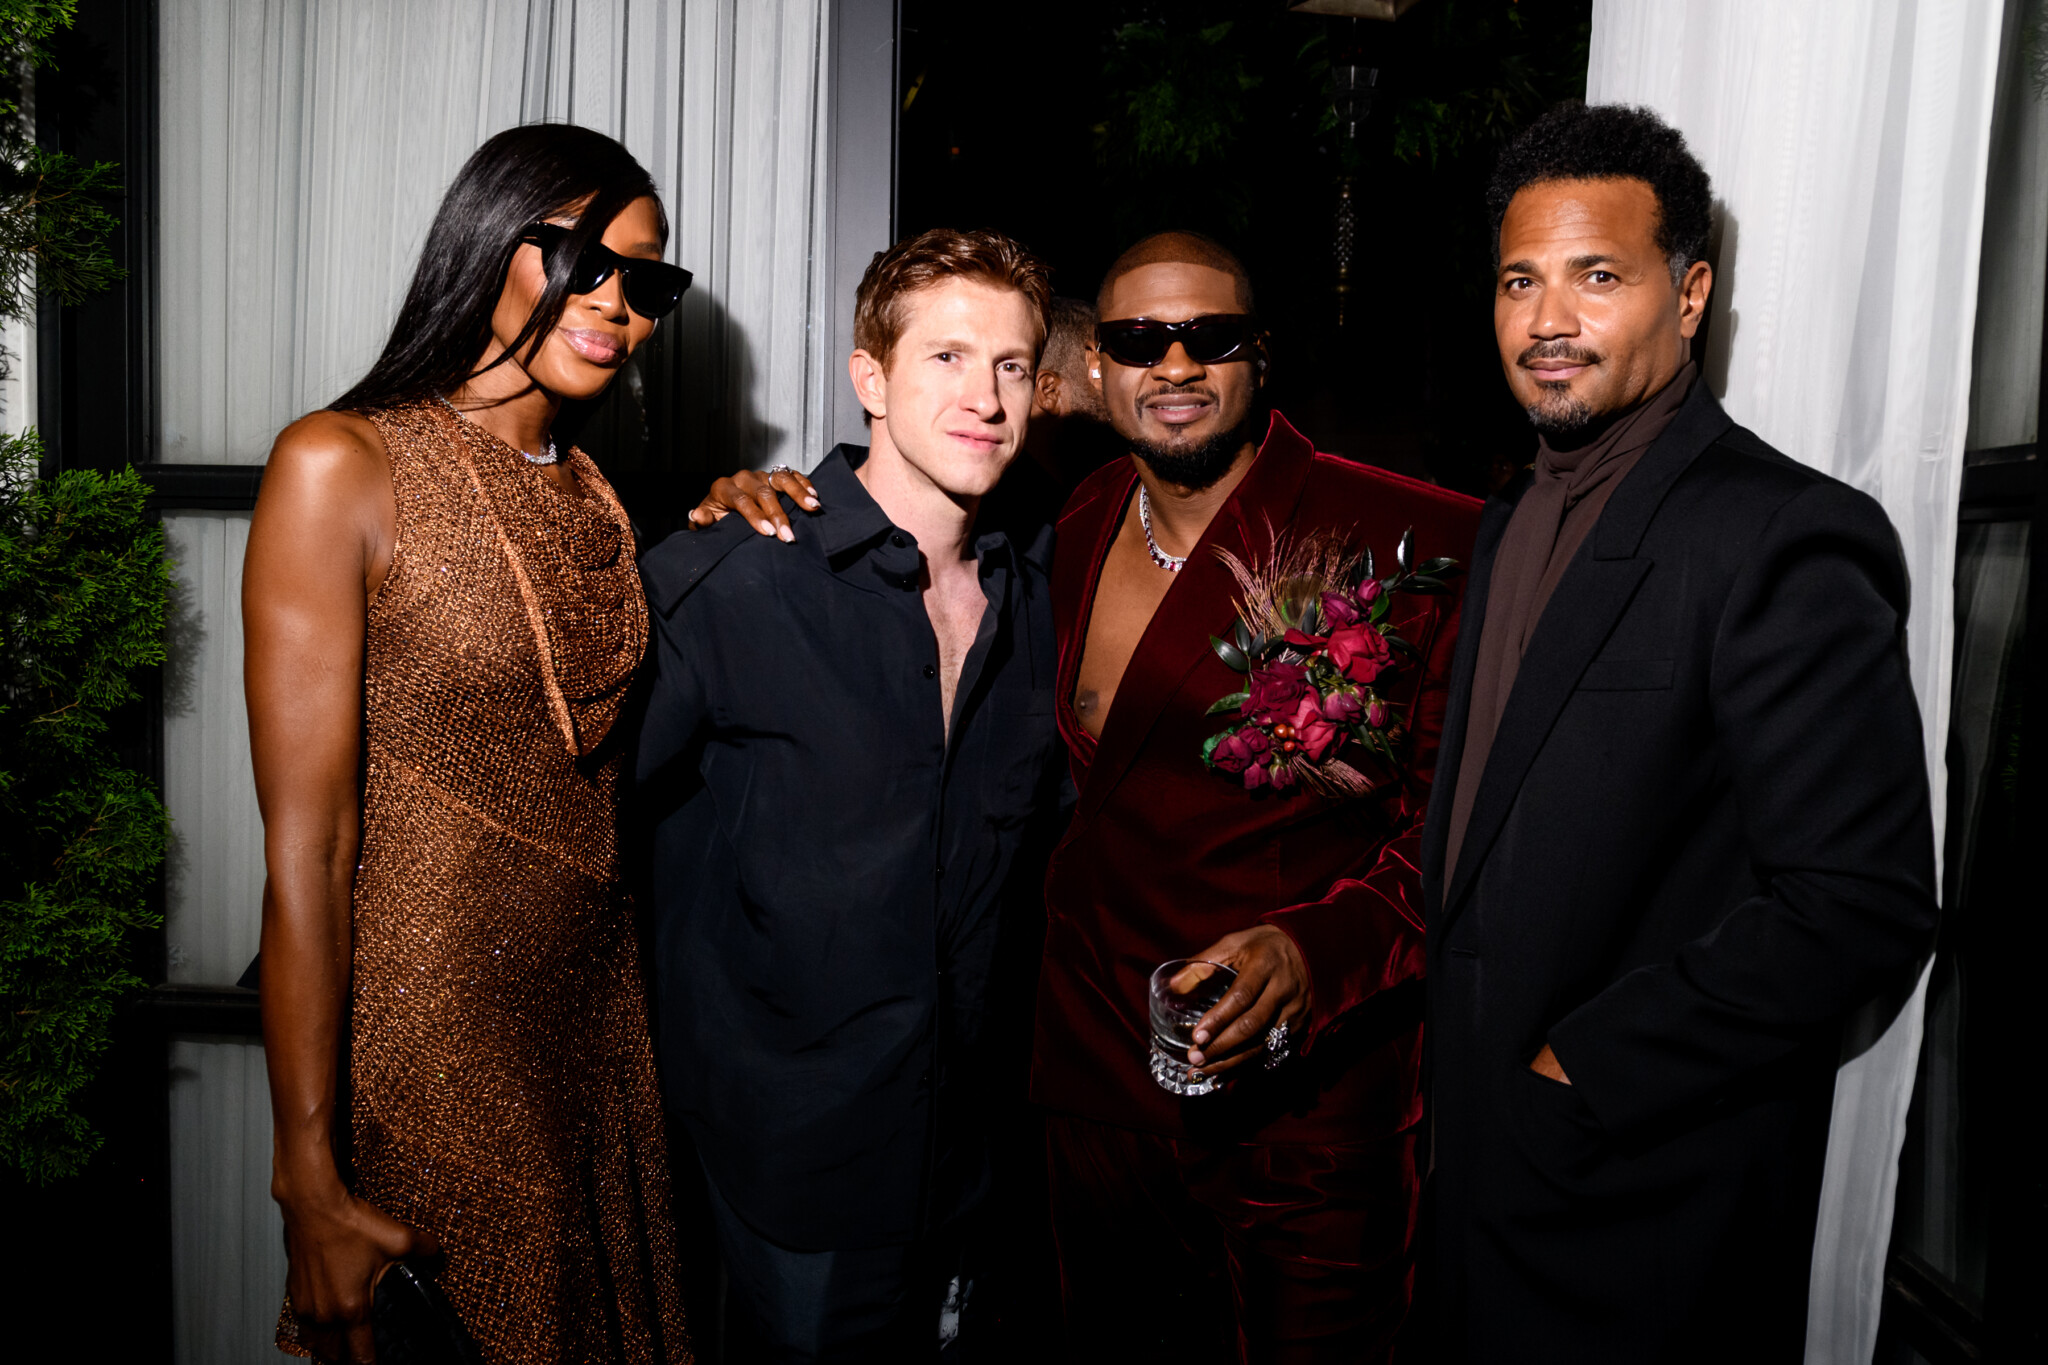 Inside the star-studded Met Gala after-show - South London News